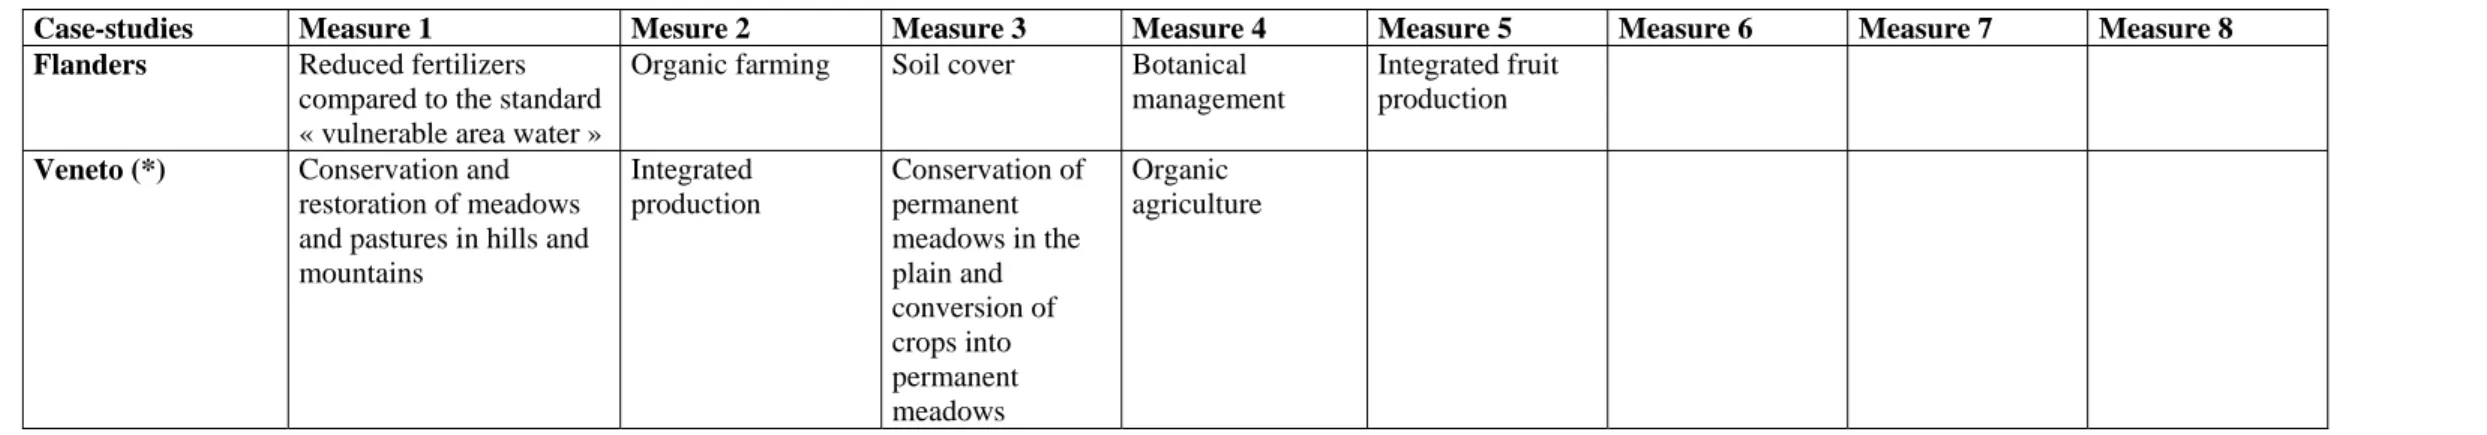 Table 10: Main measures of AESs, comprehensive overview 